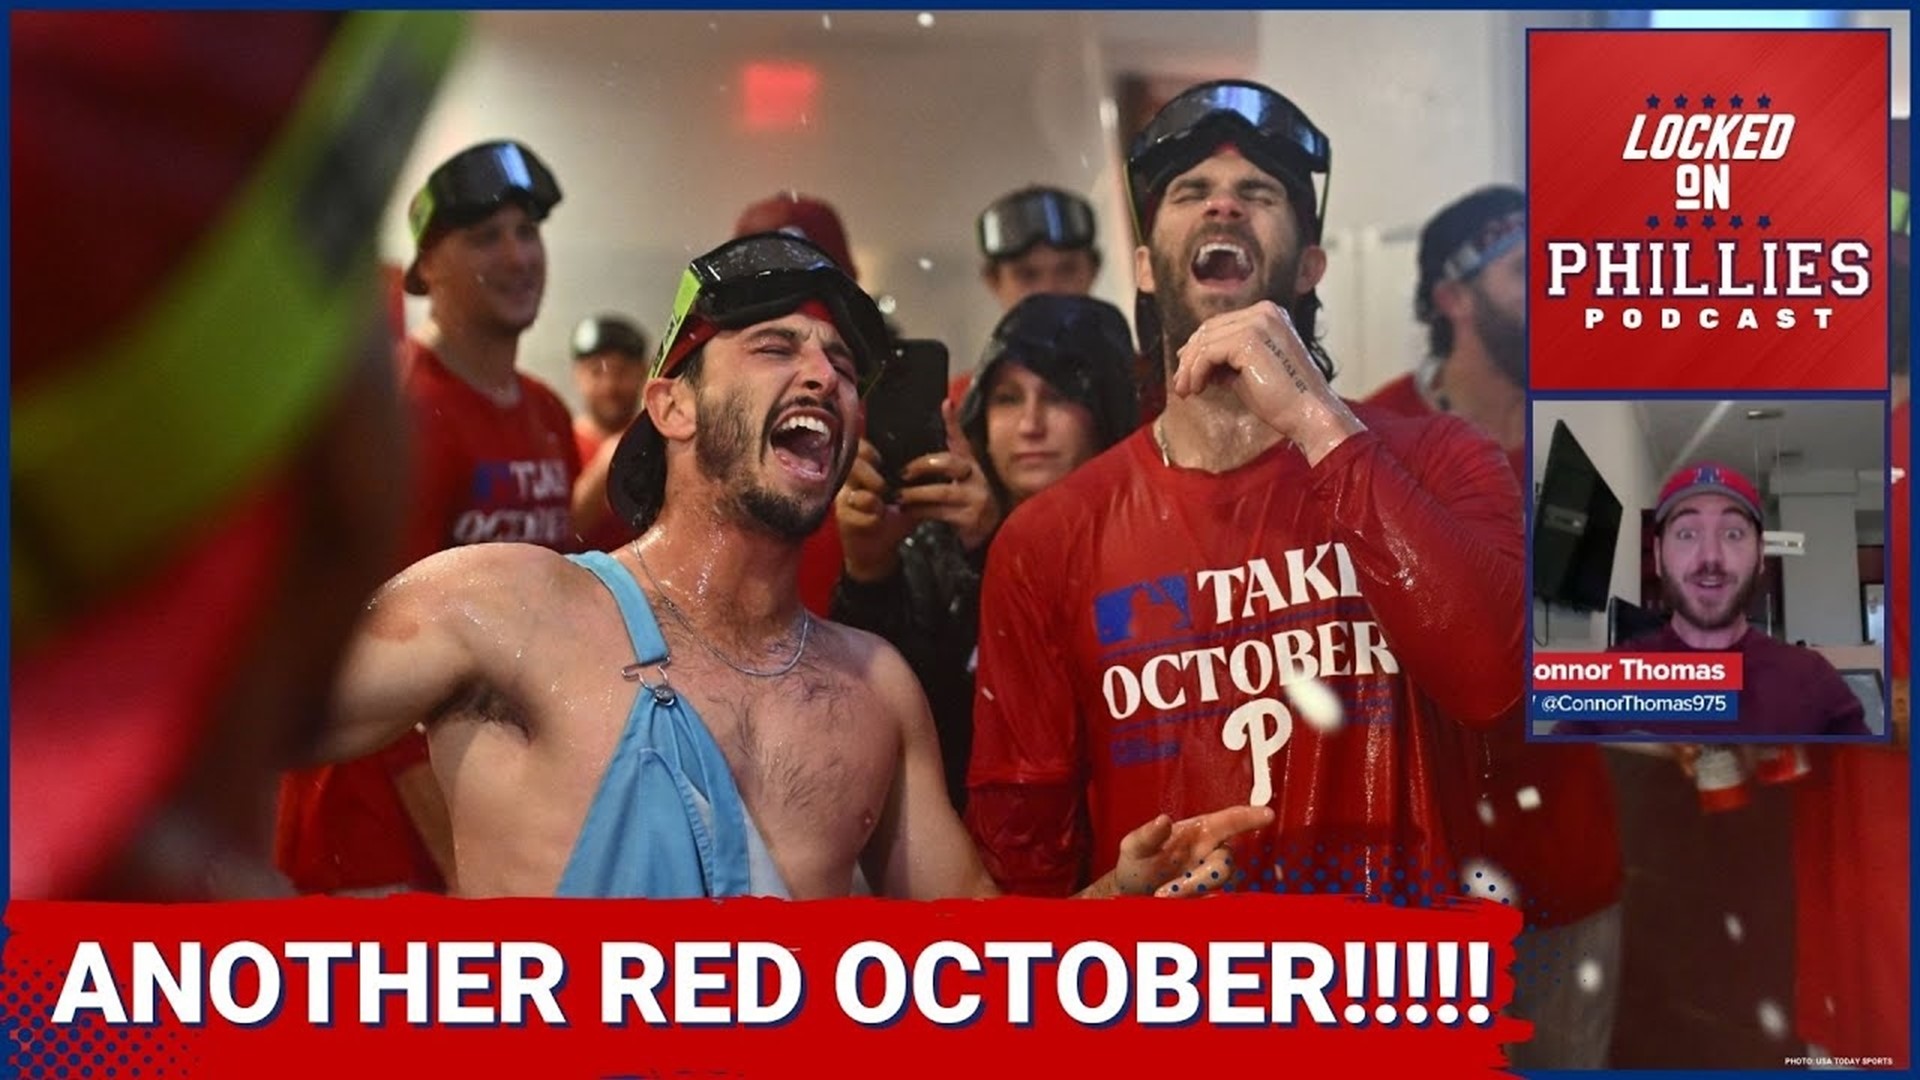 phillies red october